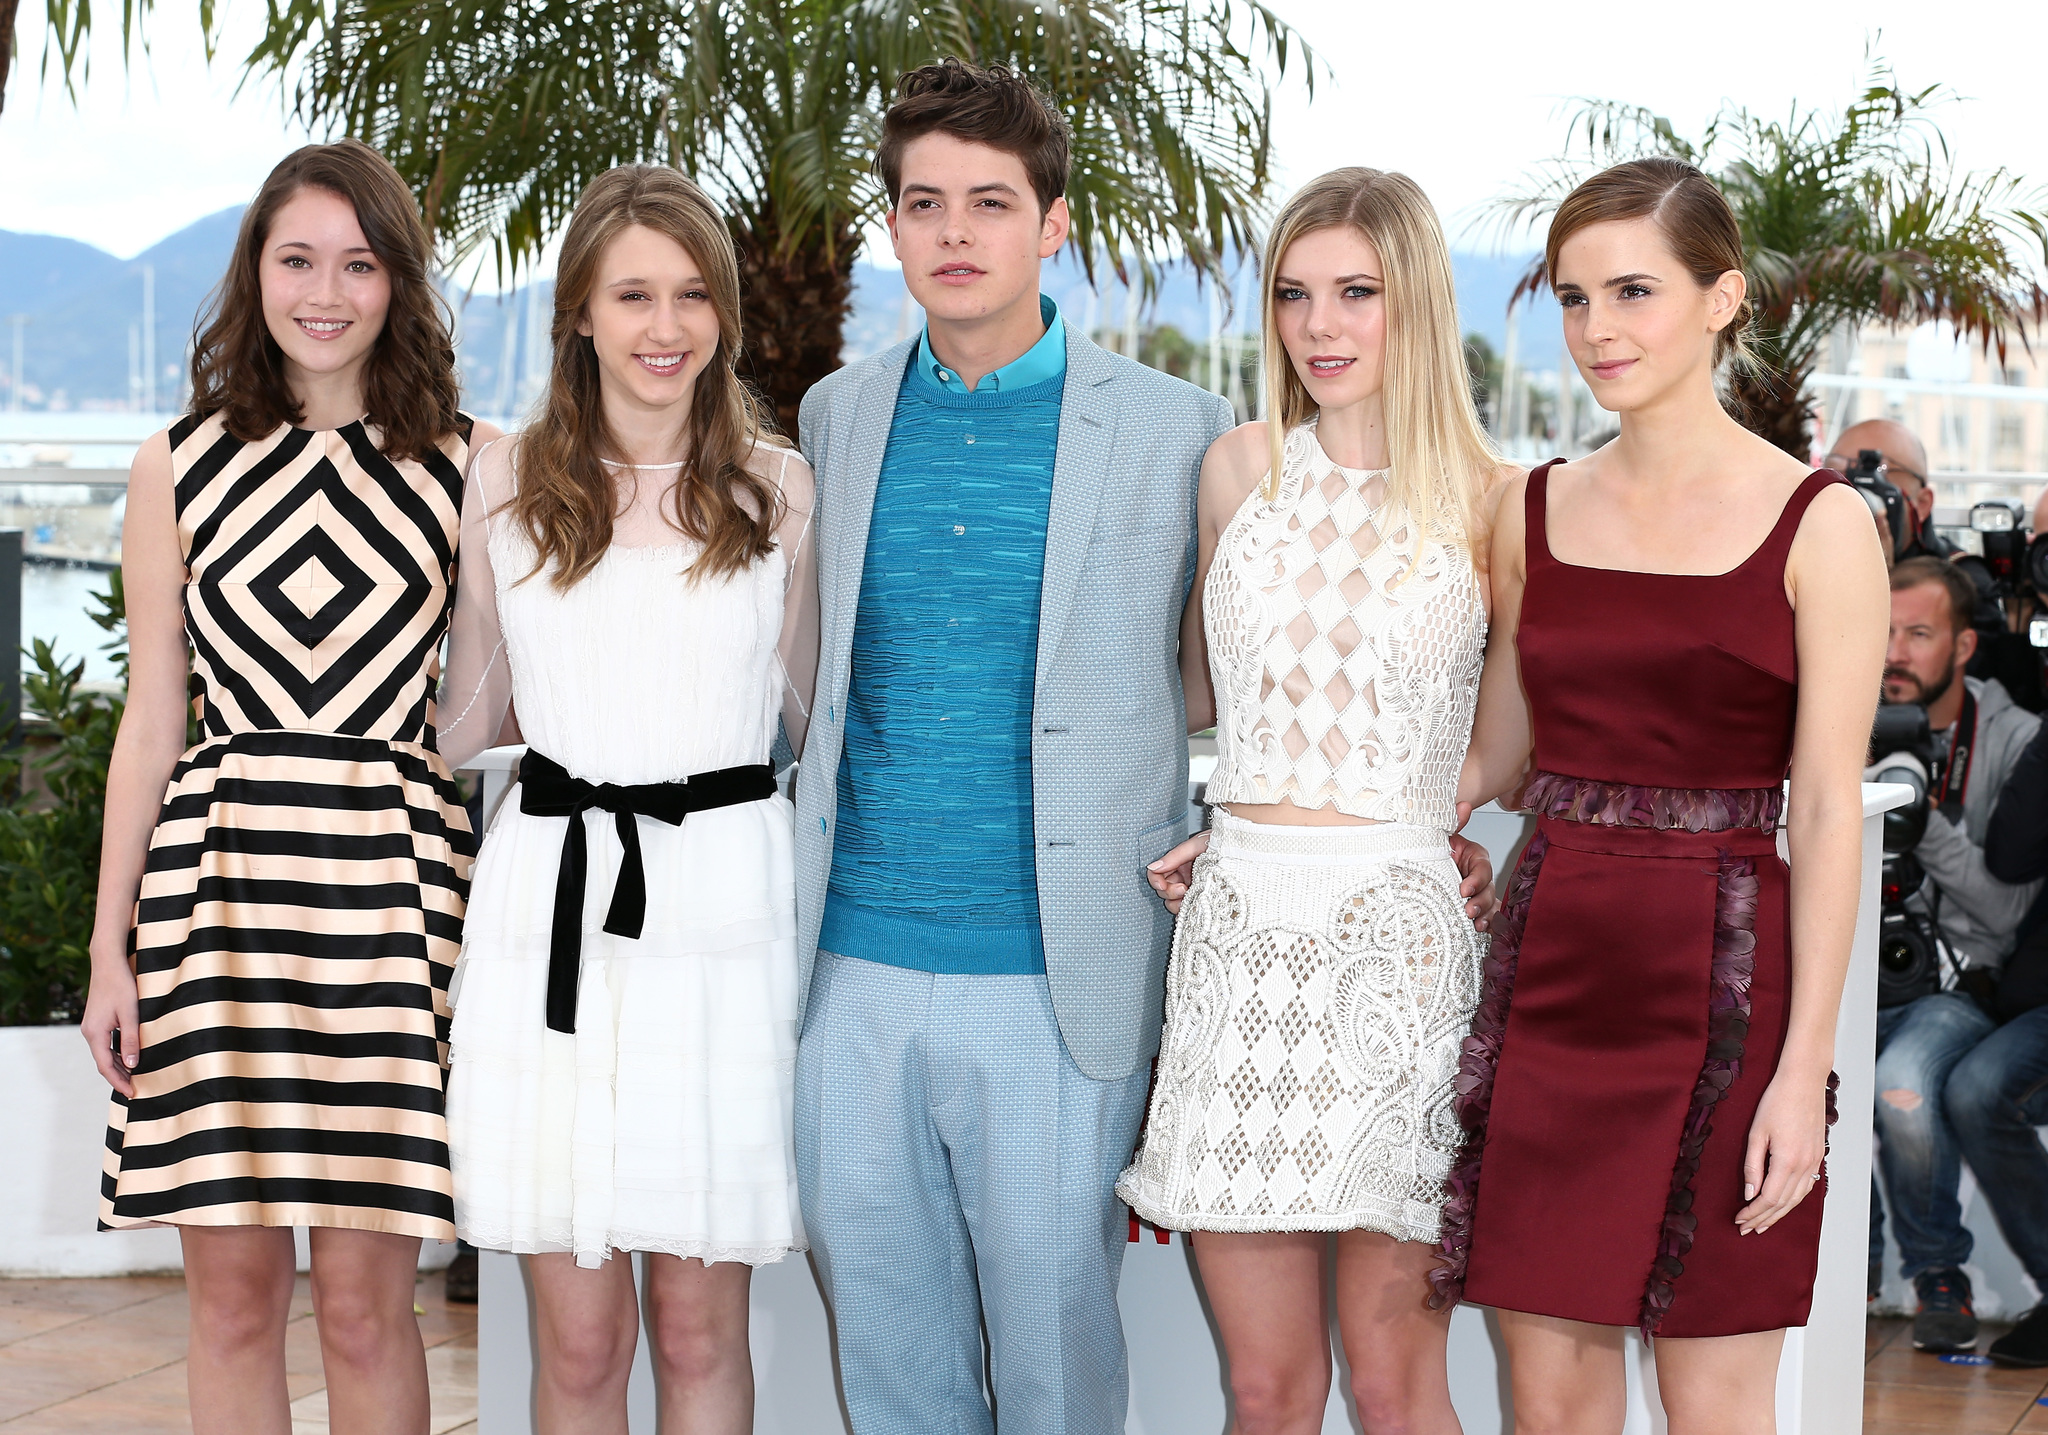 Emma Watson, Israel Broussard, Katie Chang and Claire Julien at event of Elitinis jaunimas (2013)